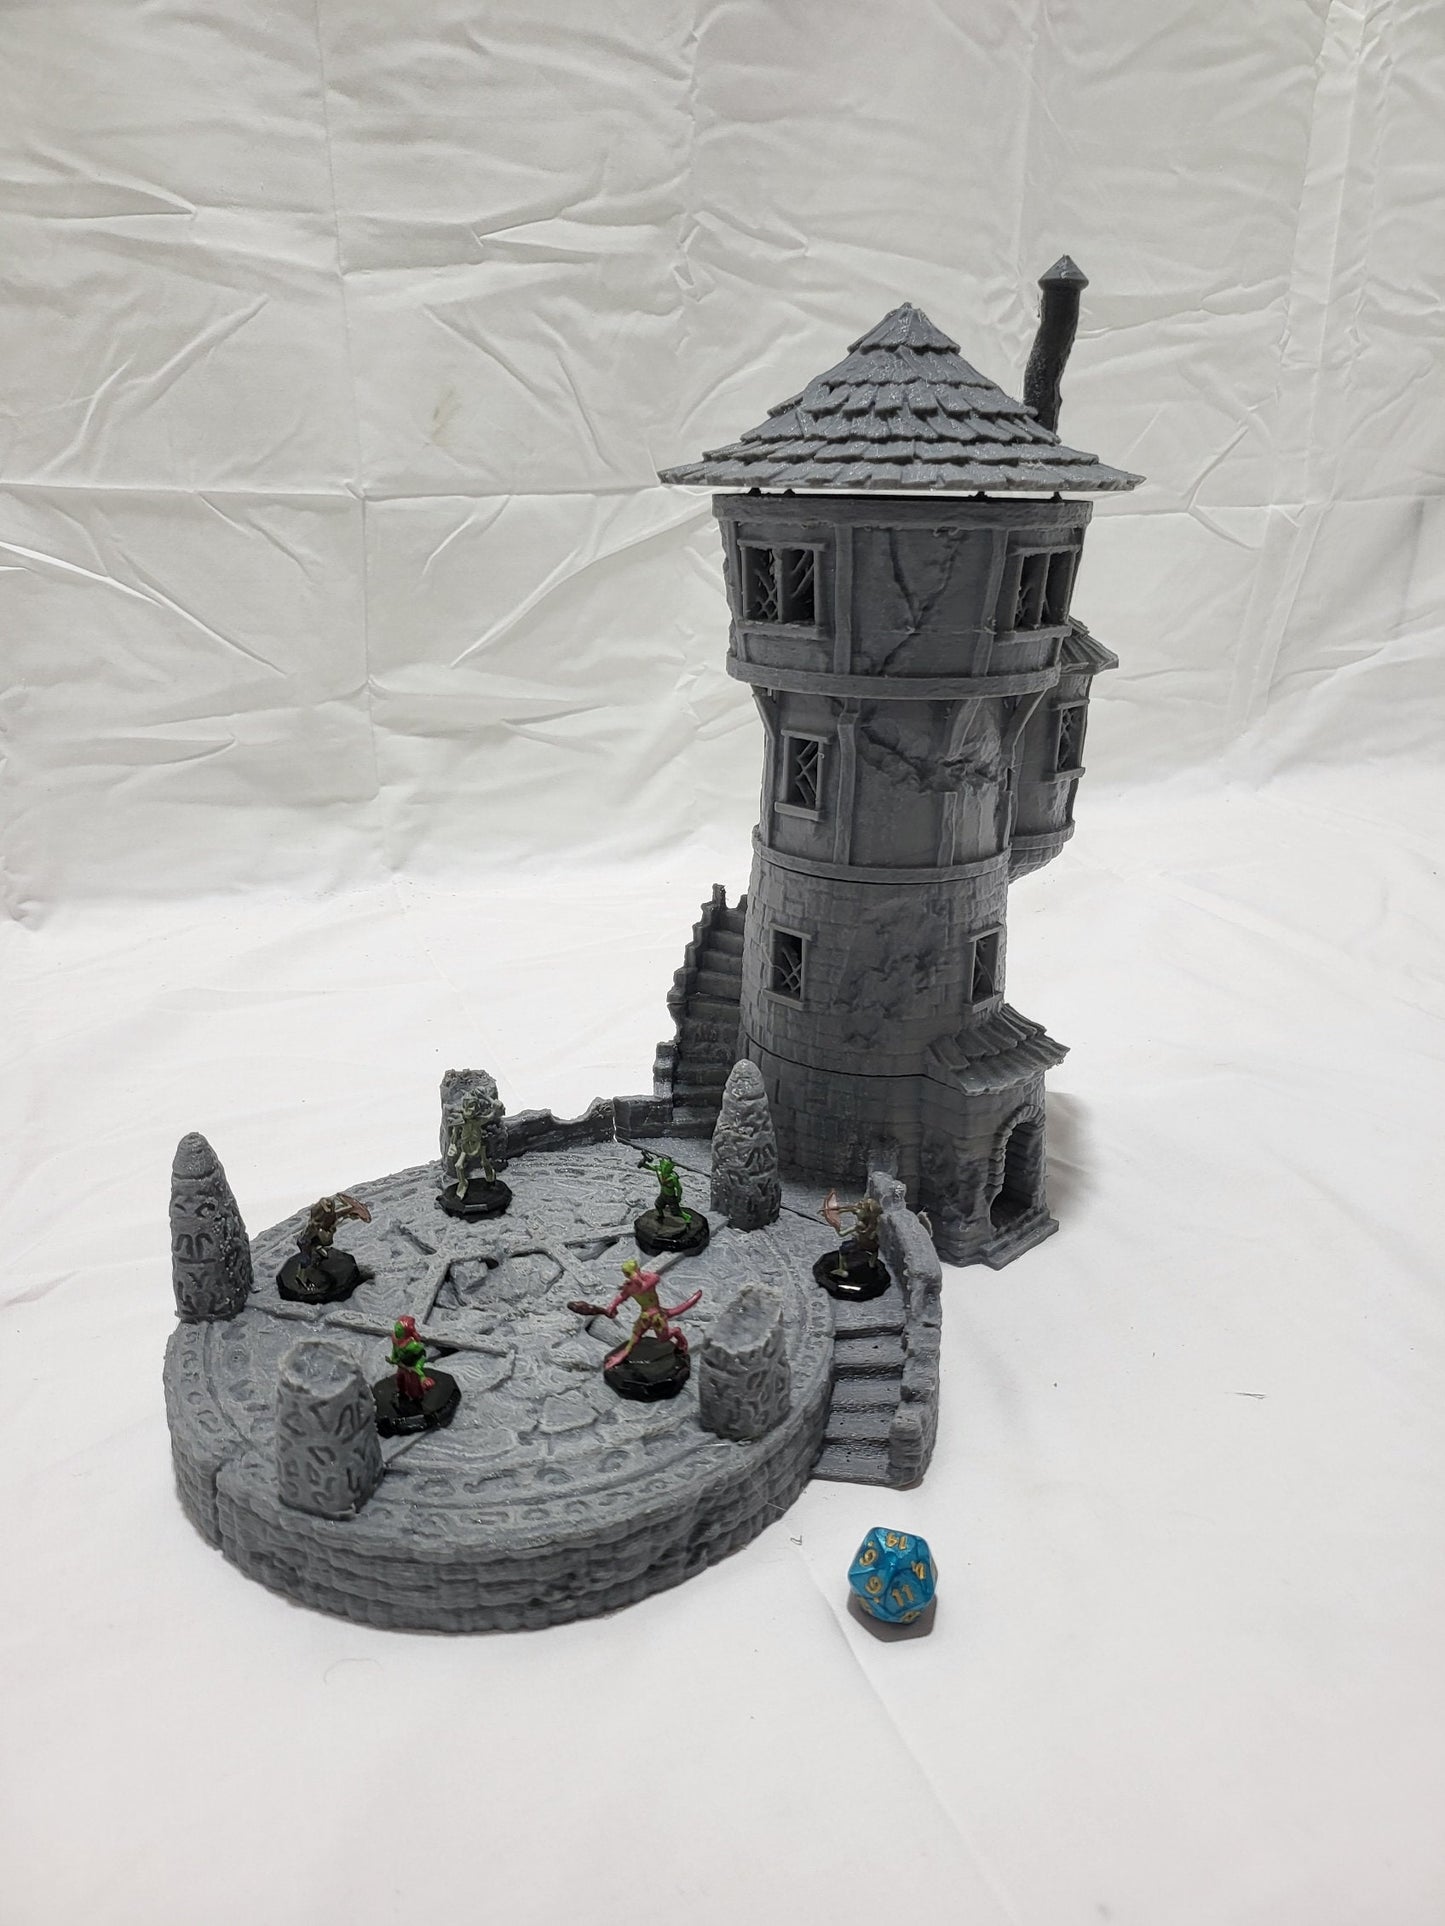 Ruined Mage Tower, Ruined Tower, Magician Ruin, Tabletop Terrain, Gaming Miniature, Tabletop Scenery